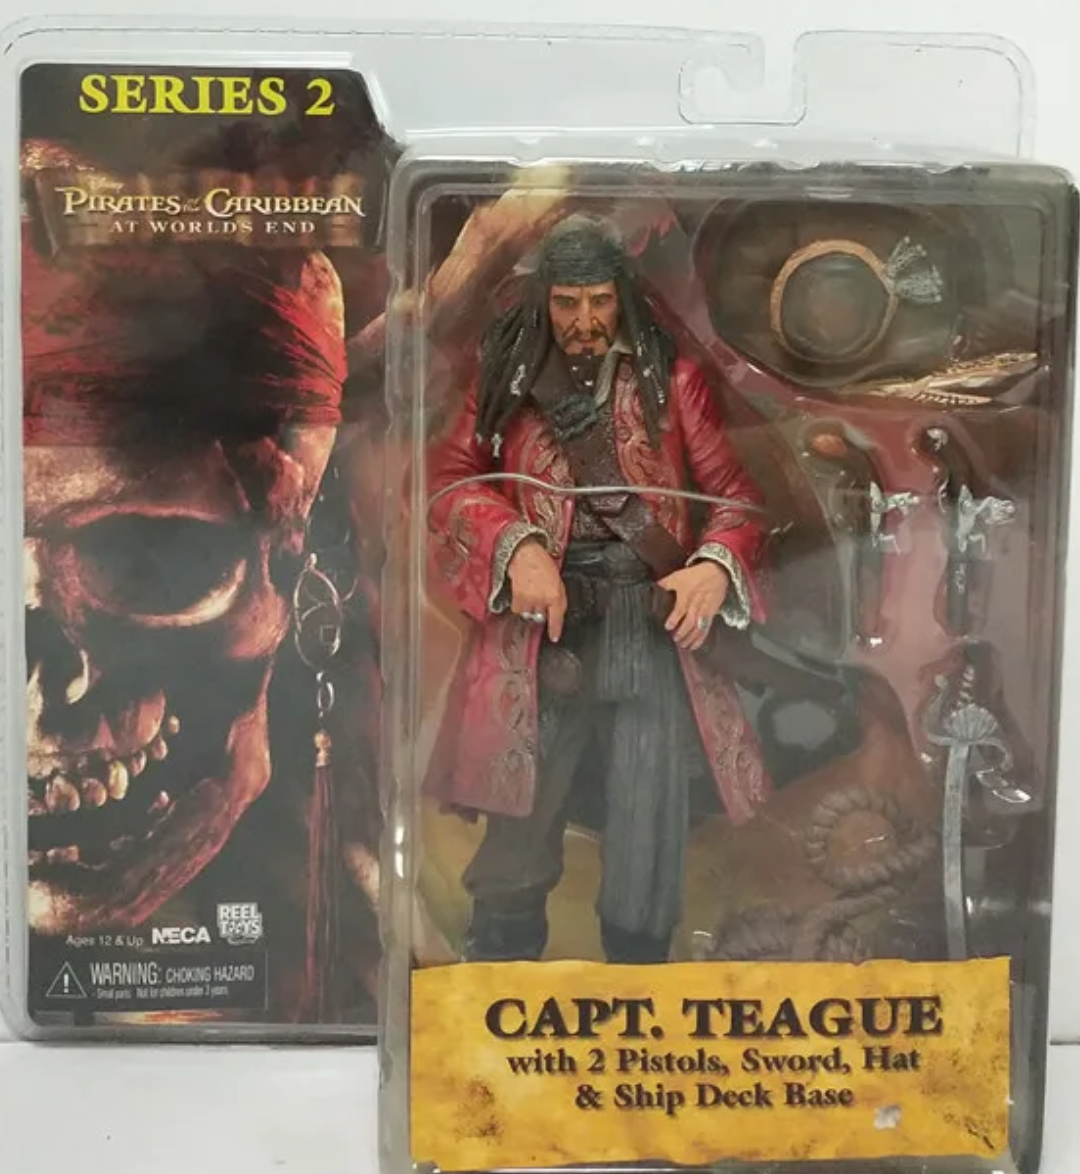 Reel Toys Neca Pirates of the Caribbean Series 2 Capt Teague Action Figure